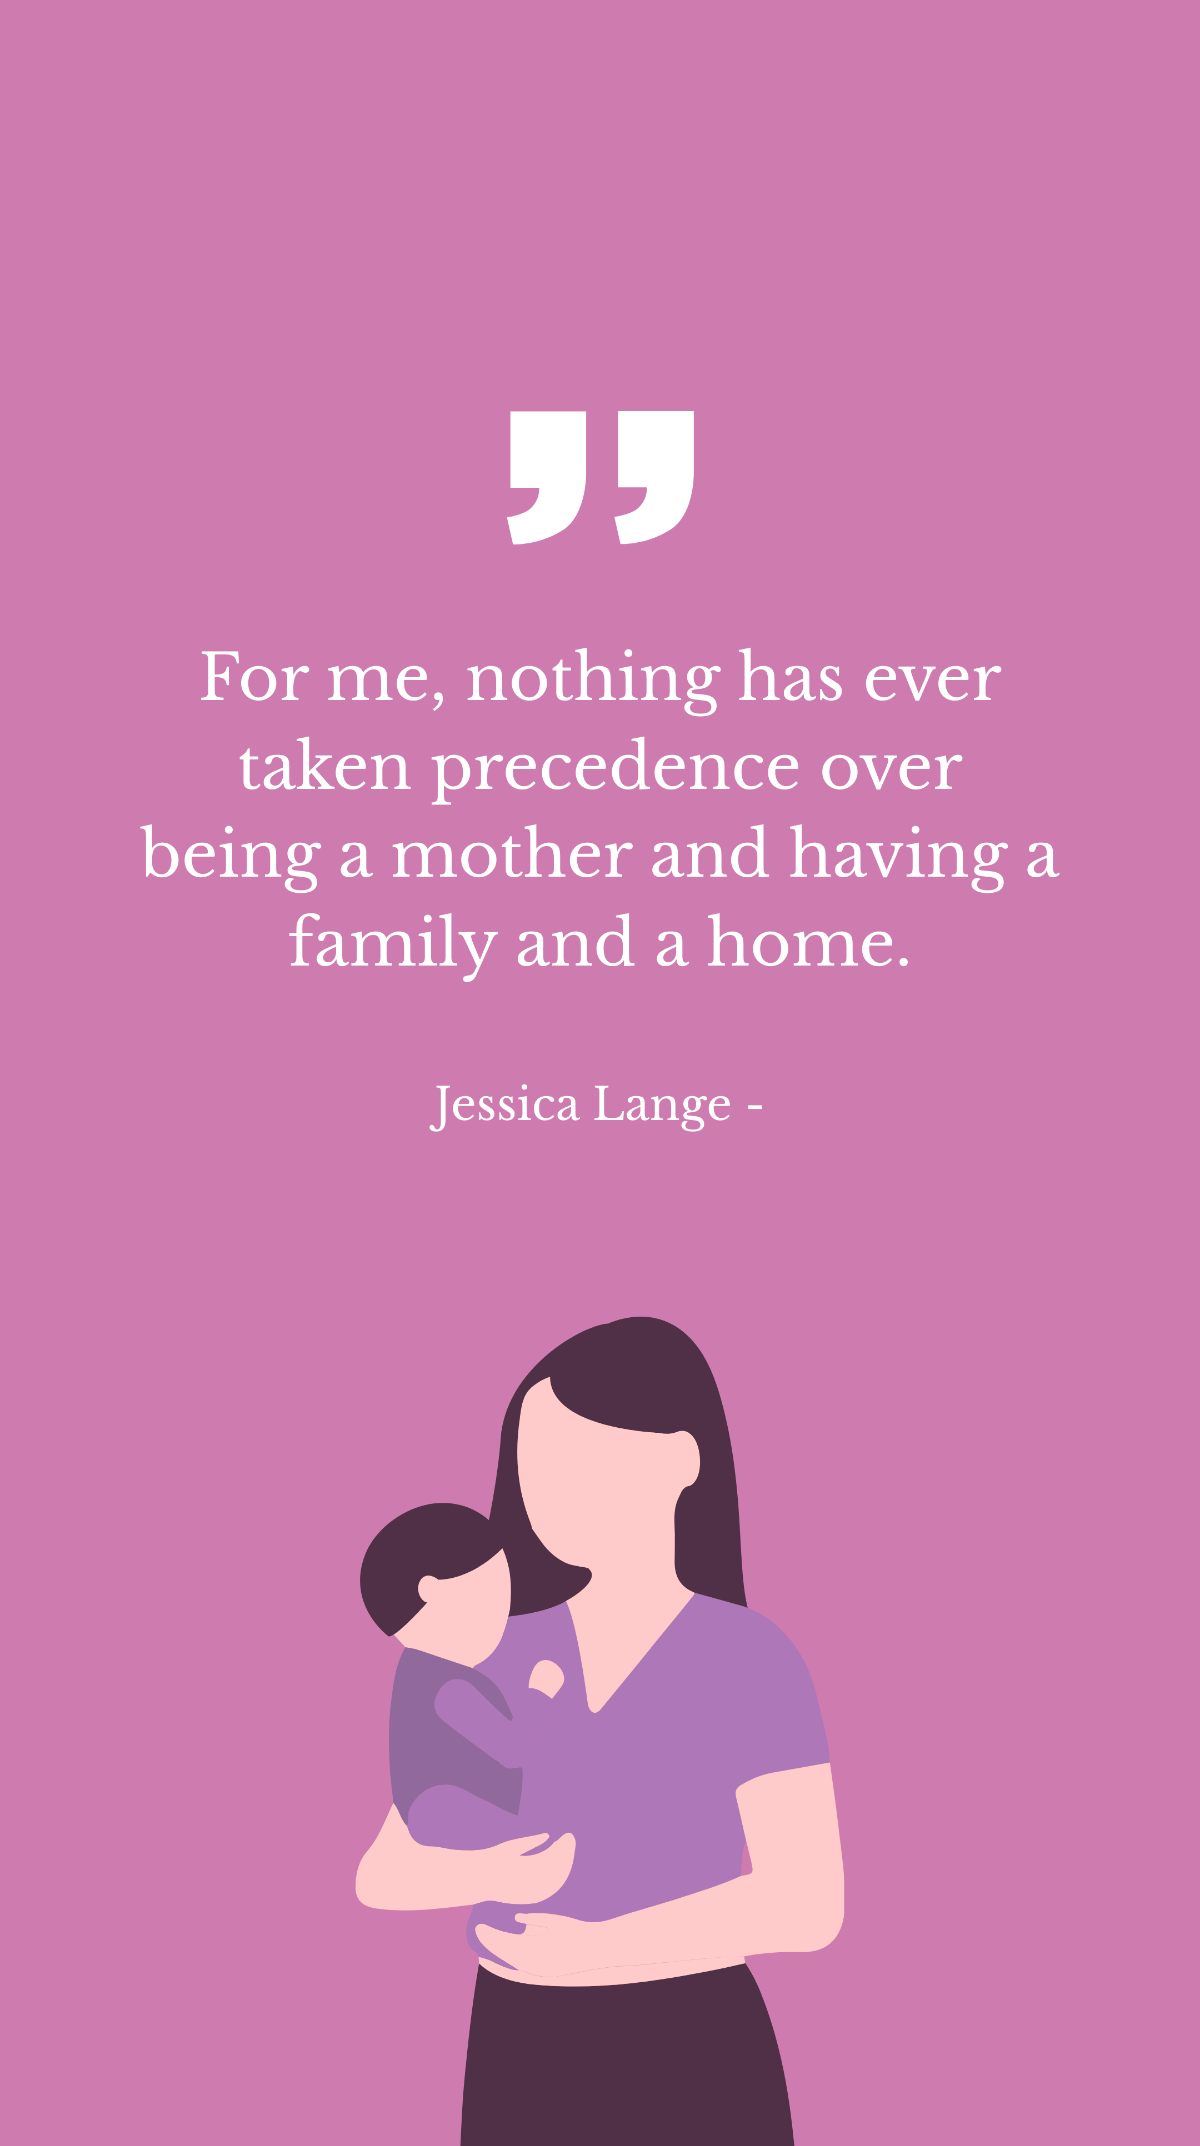 Free Jessica Lange - For me, nothing has ever taken precedence over being a mother and having a family and a home. Template